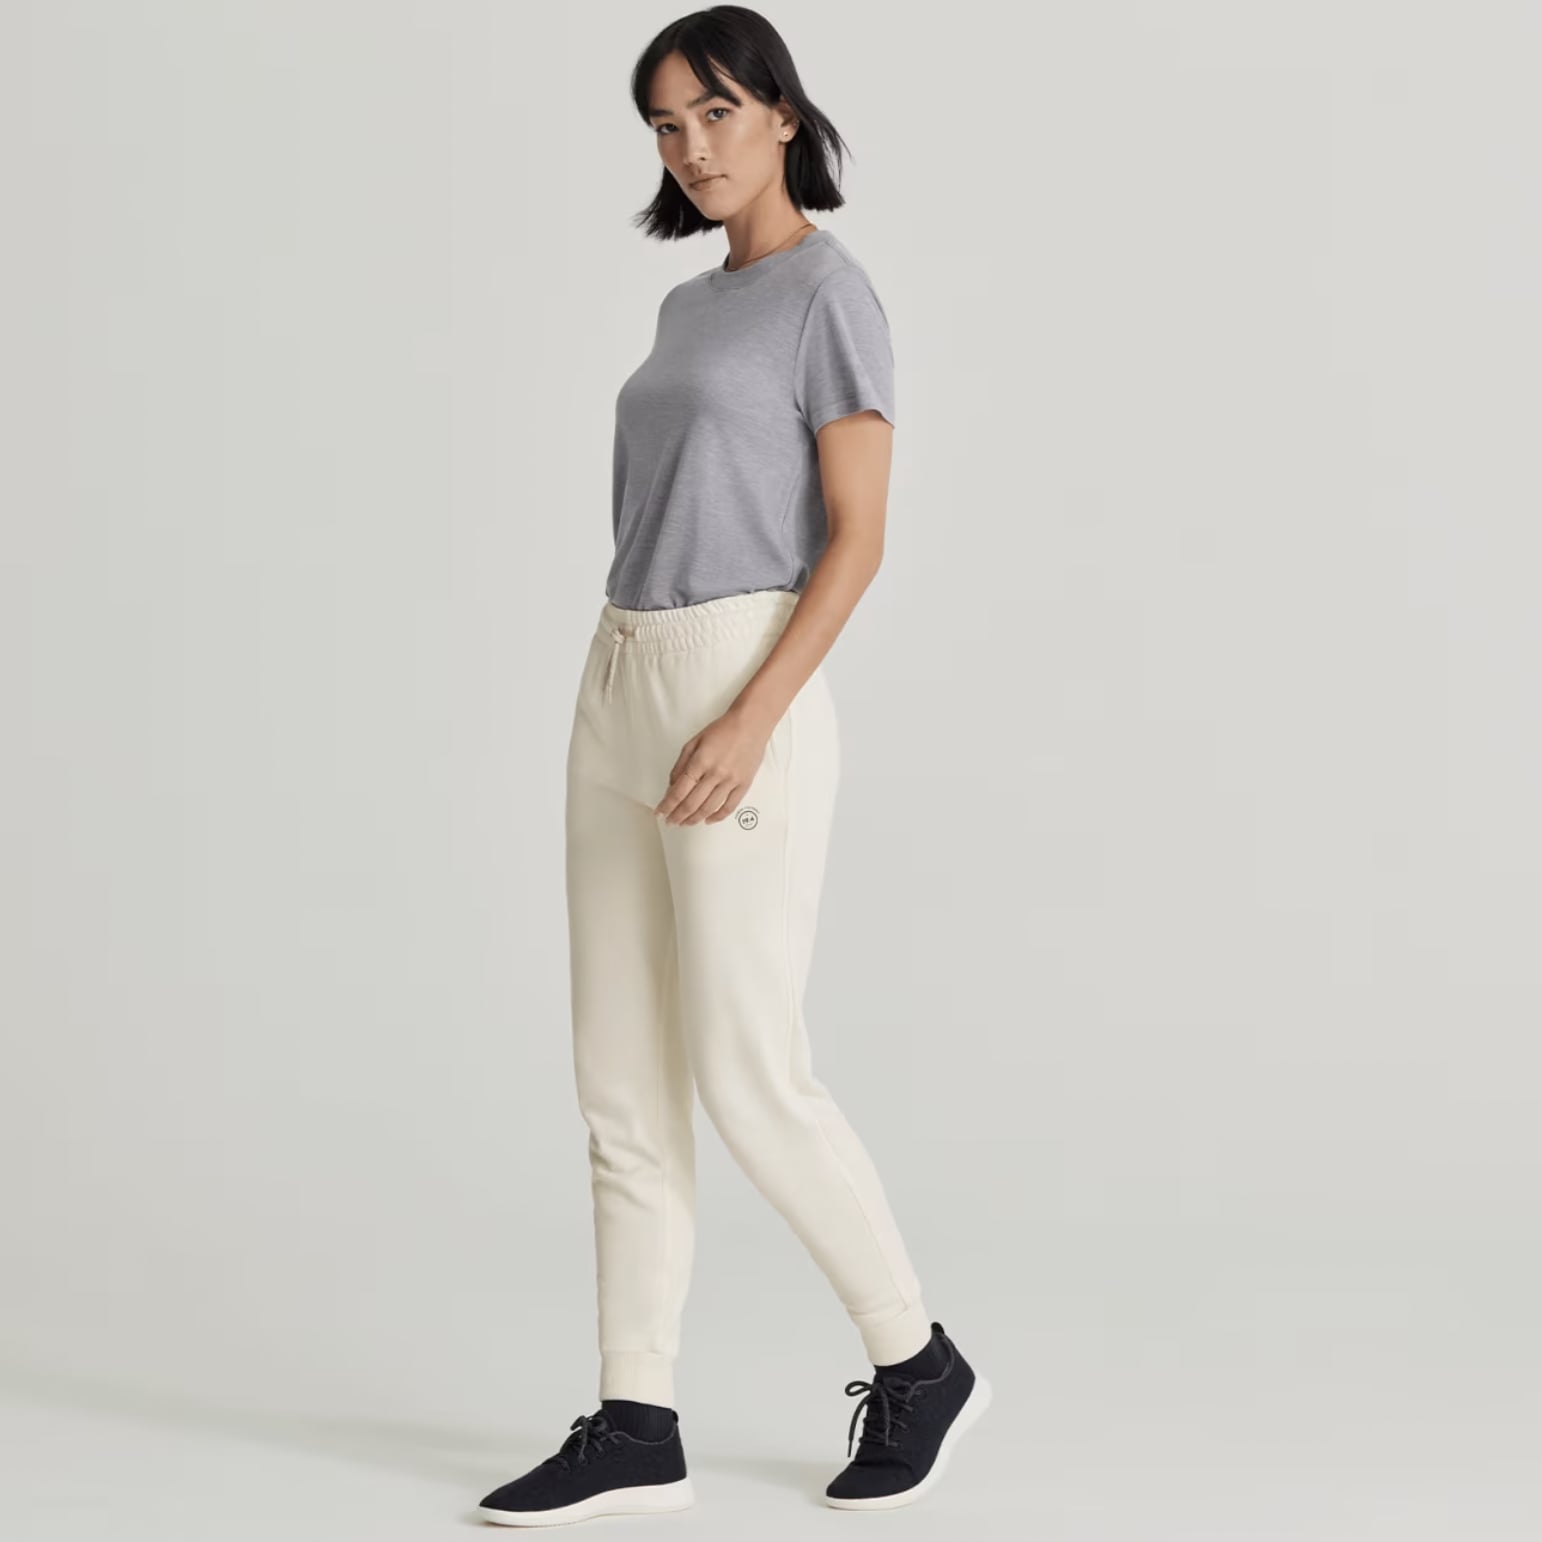 10 Cute and Comfortable Sweatpants For Women